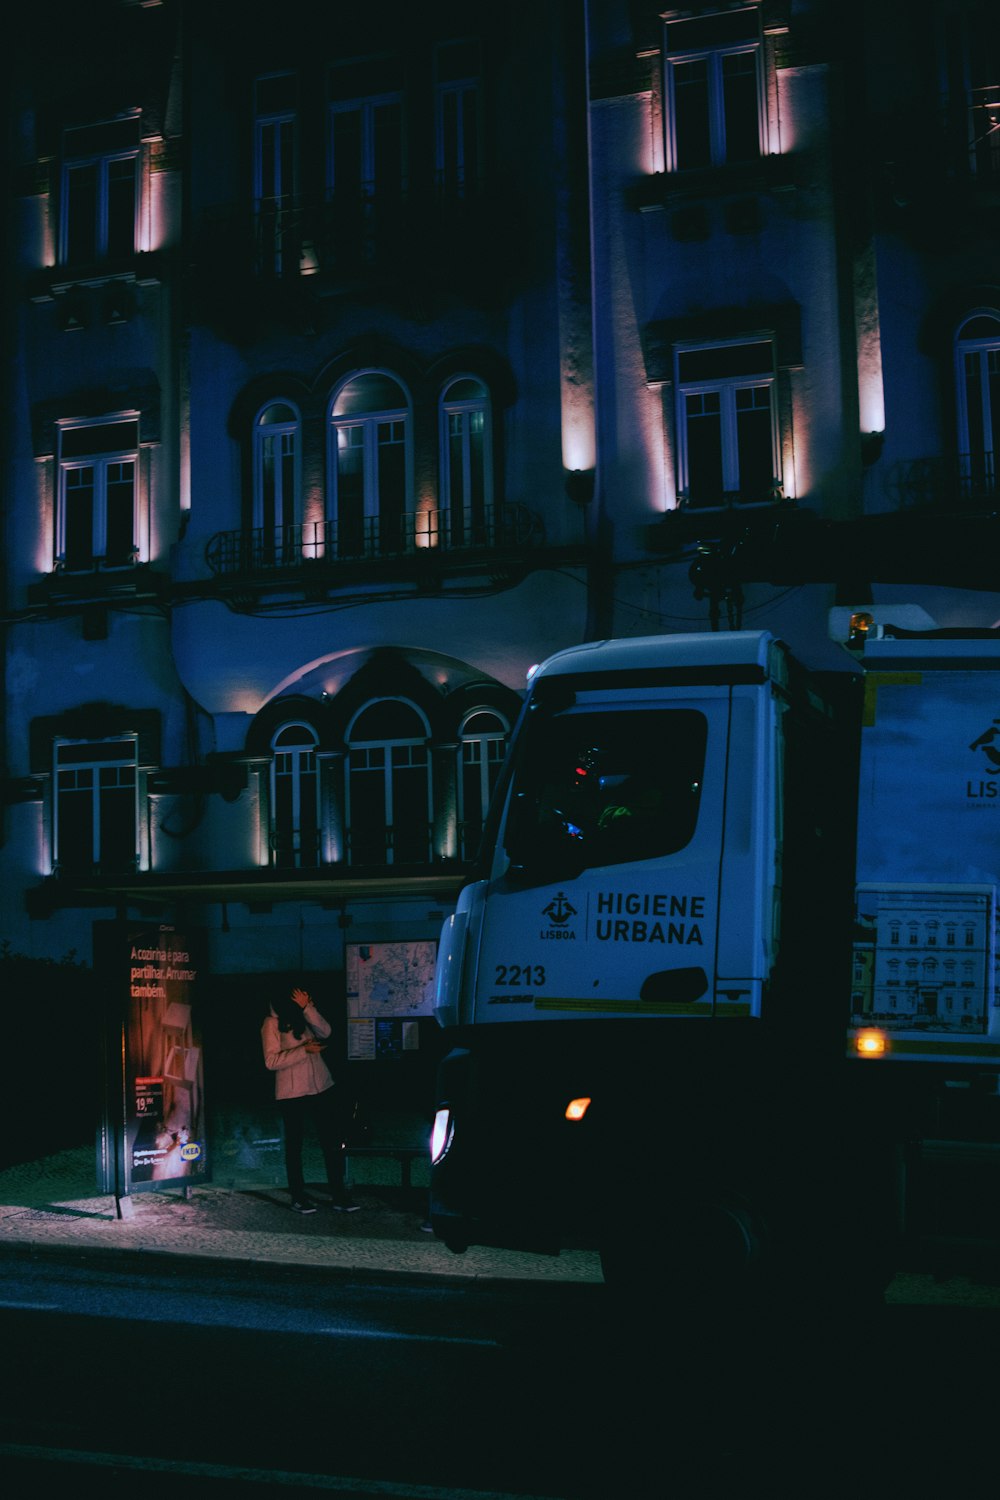 a truck parked in front of a building at night